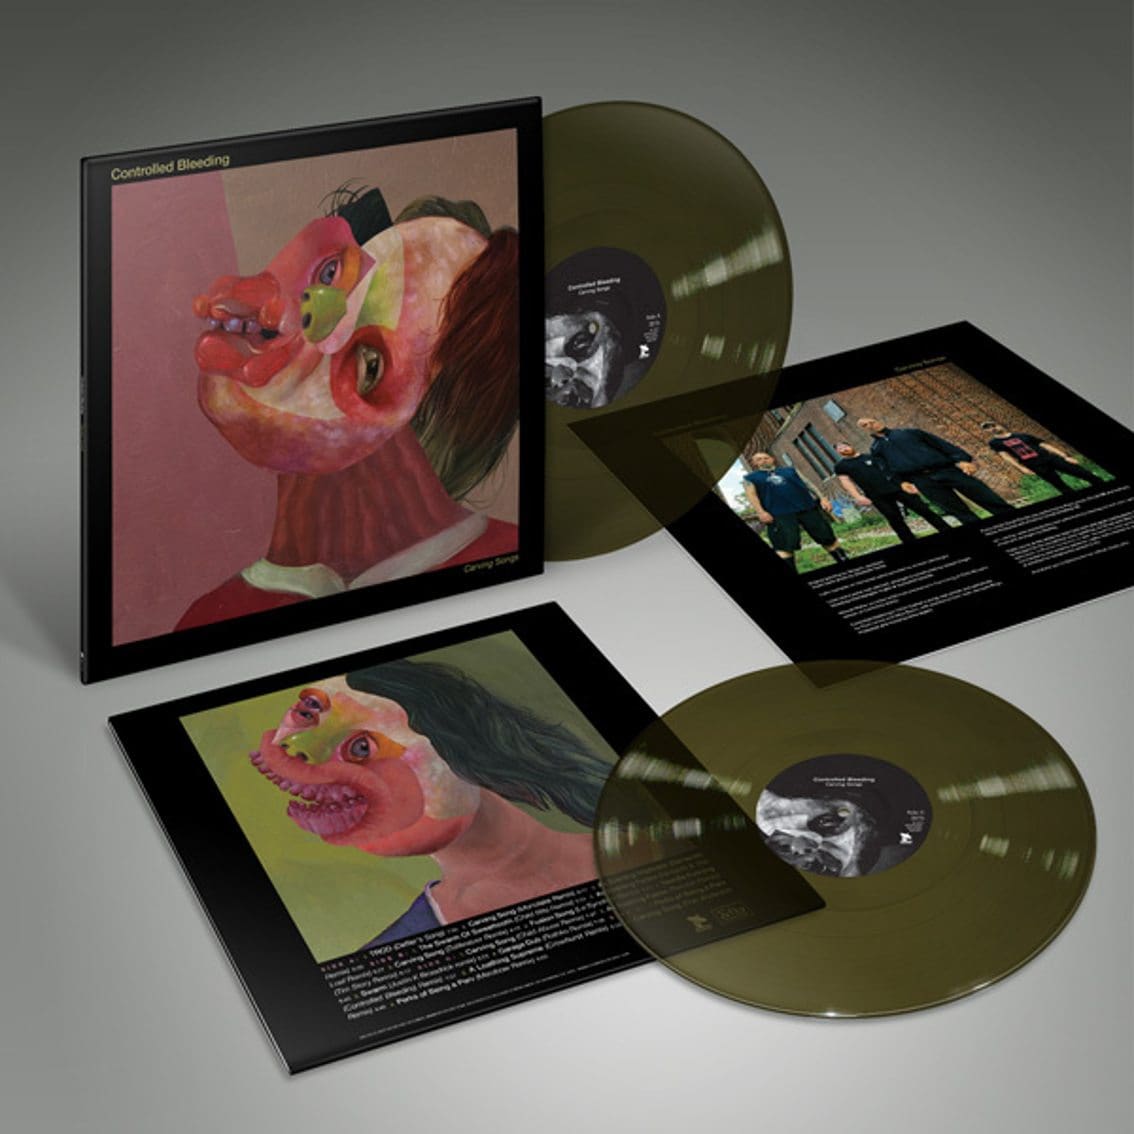 Controlled Bleeding sees remix album 'Carving songs' released in late August incl. new track + vinyl editions - order now